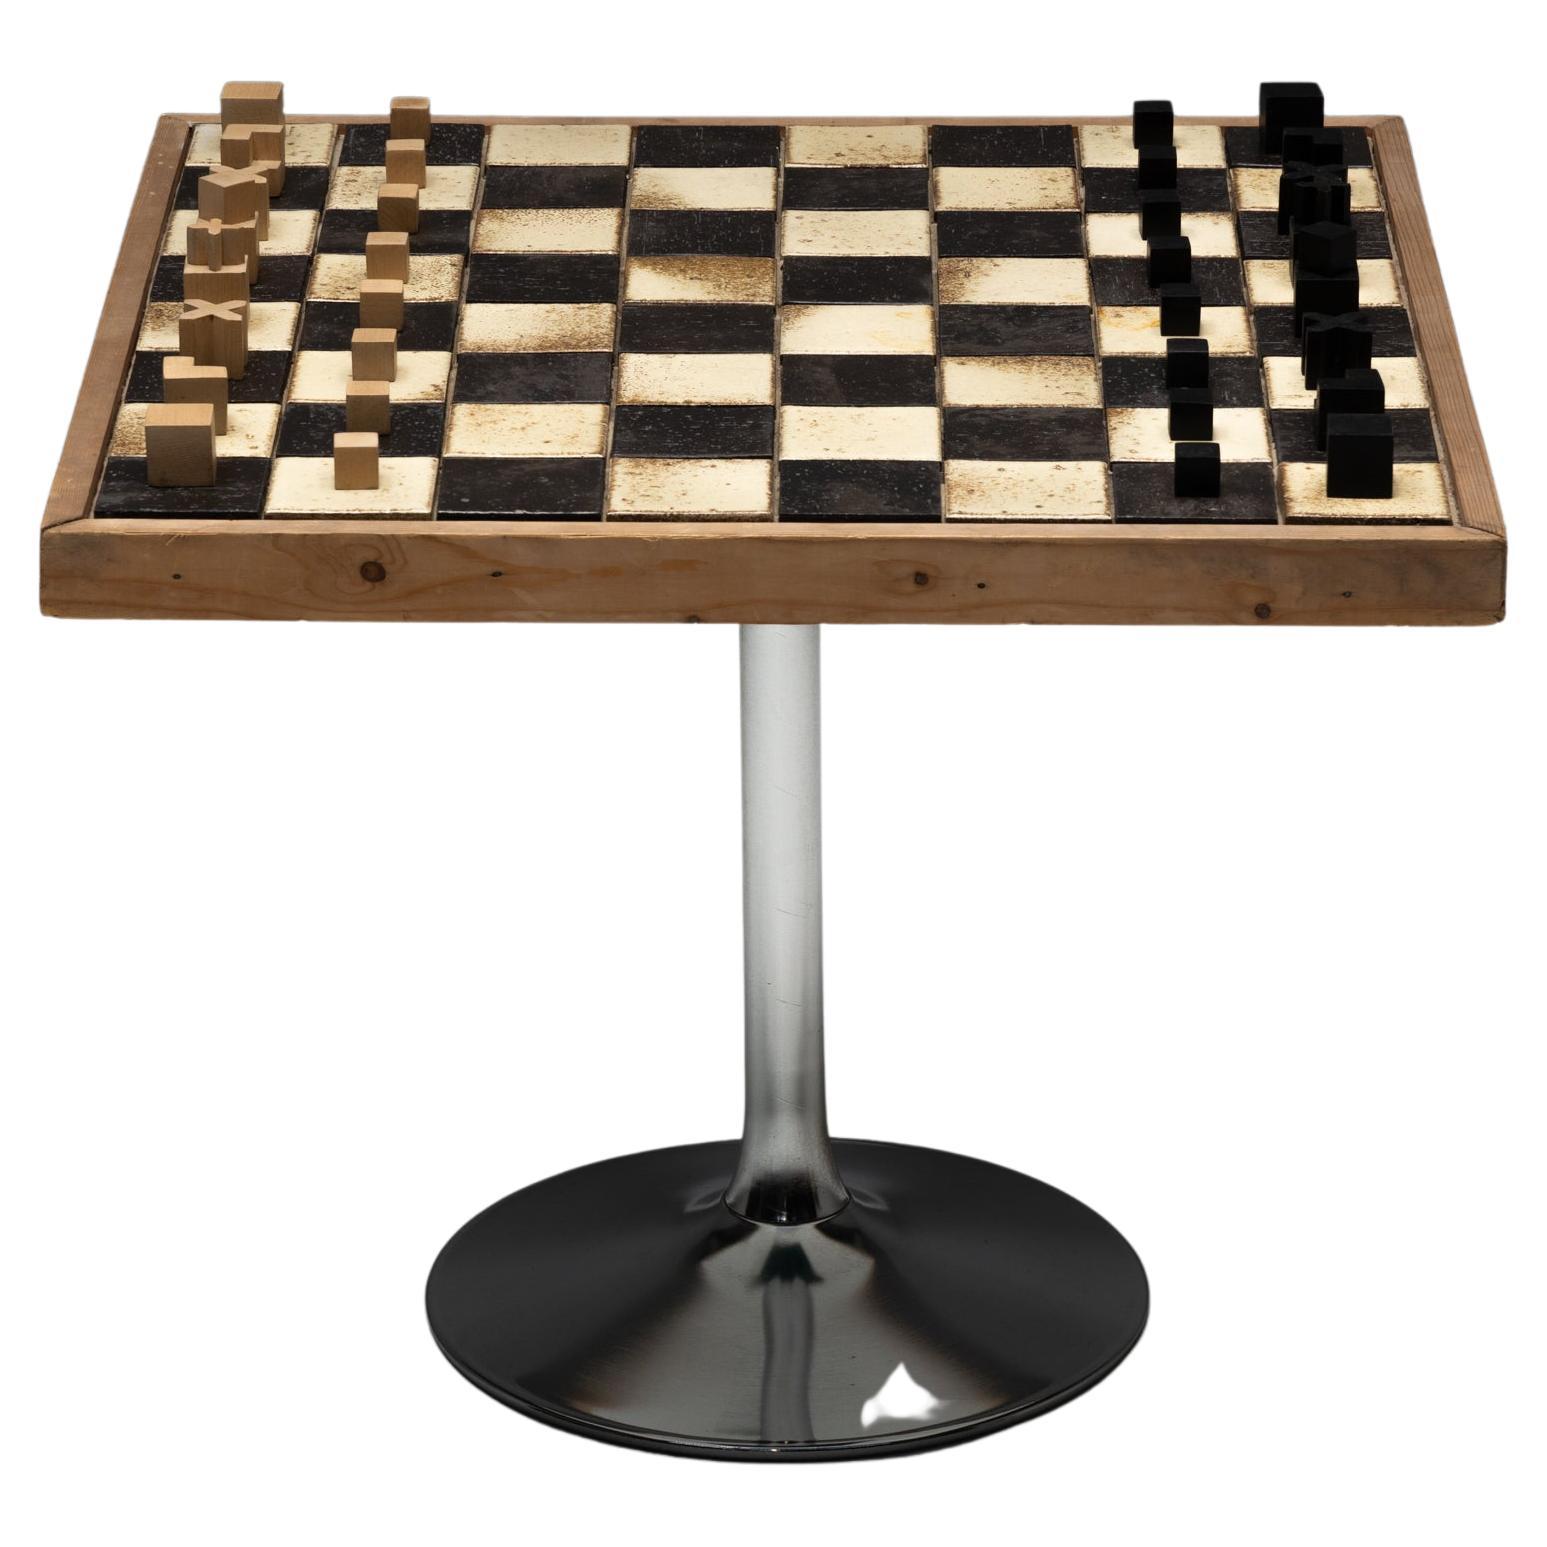 Game Table with Bauhaus Chess Set by Josef Hartwig, Germany, 1924